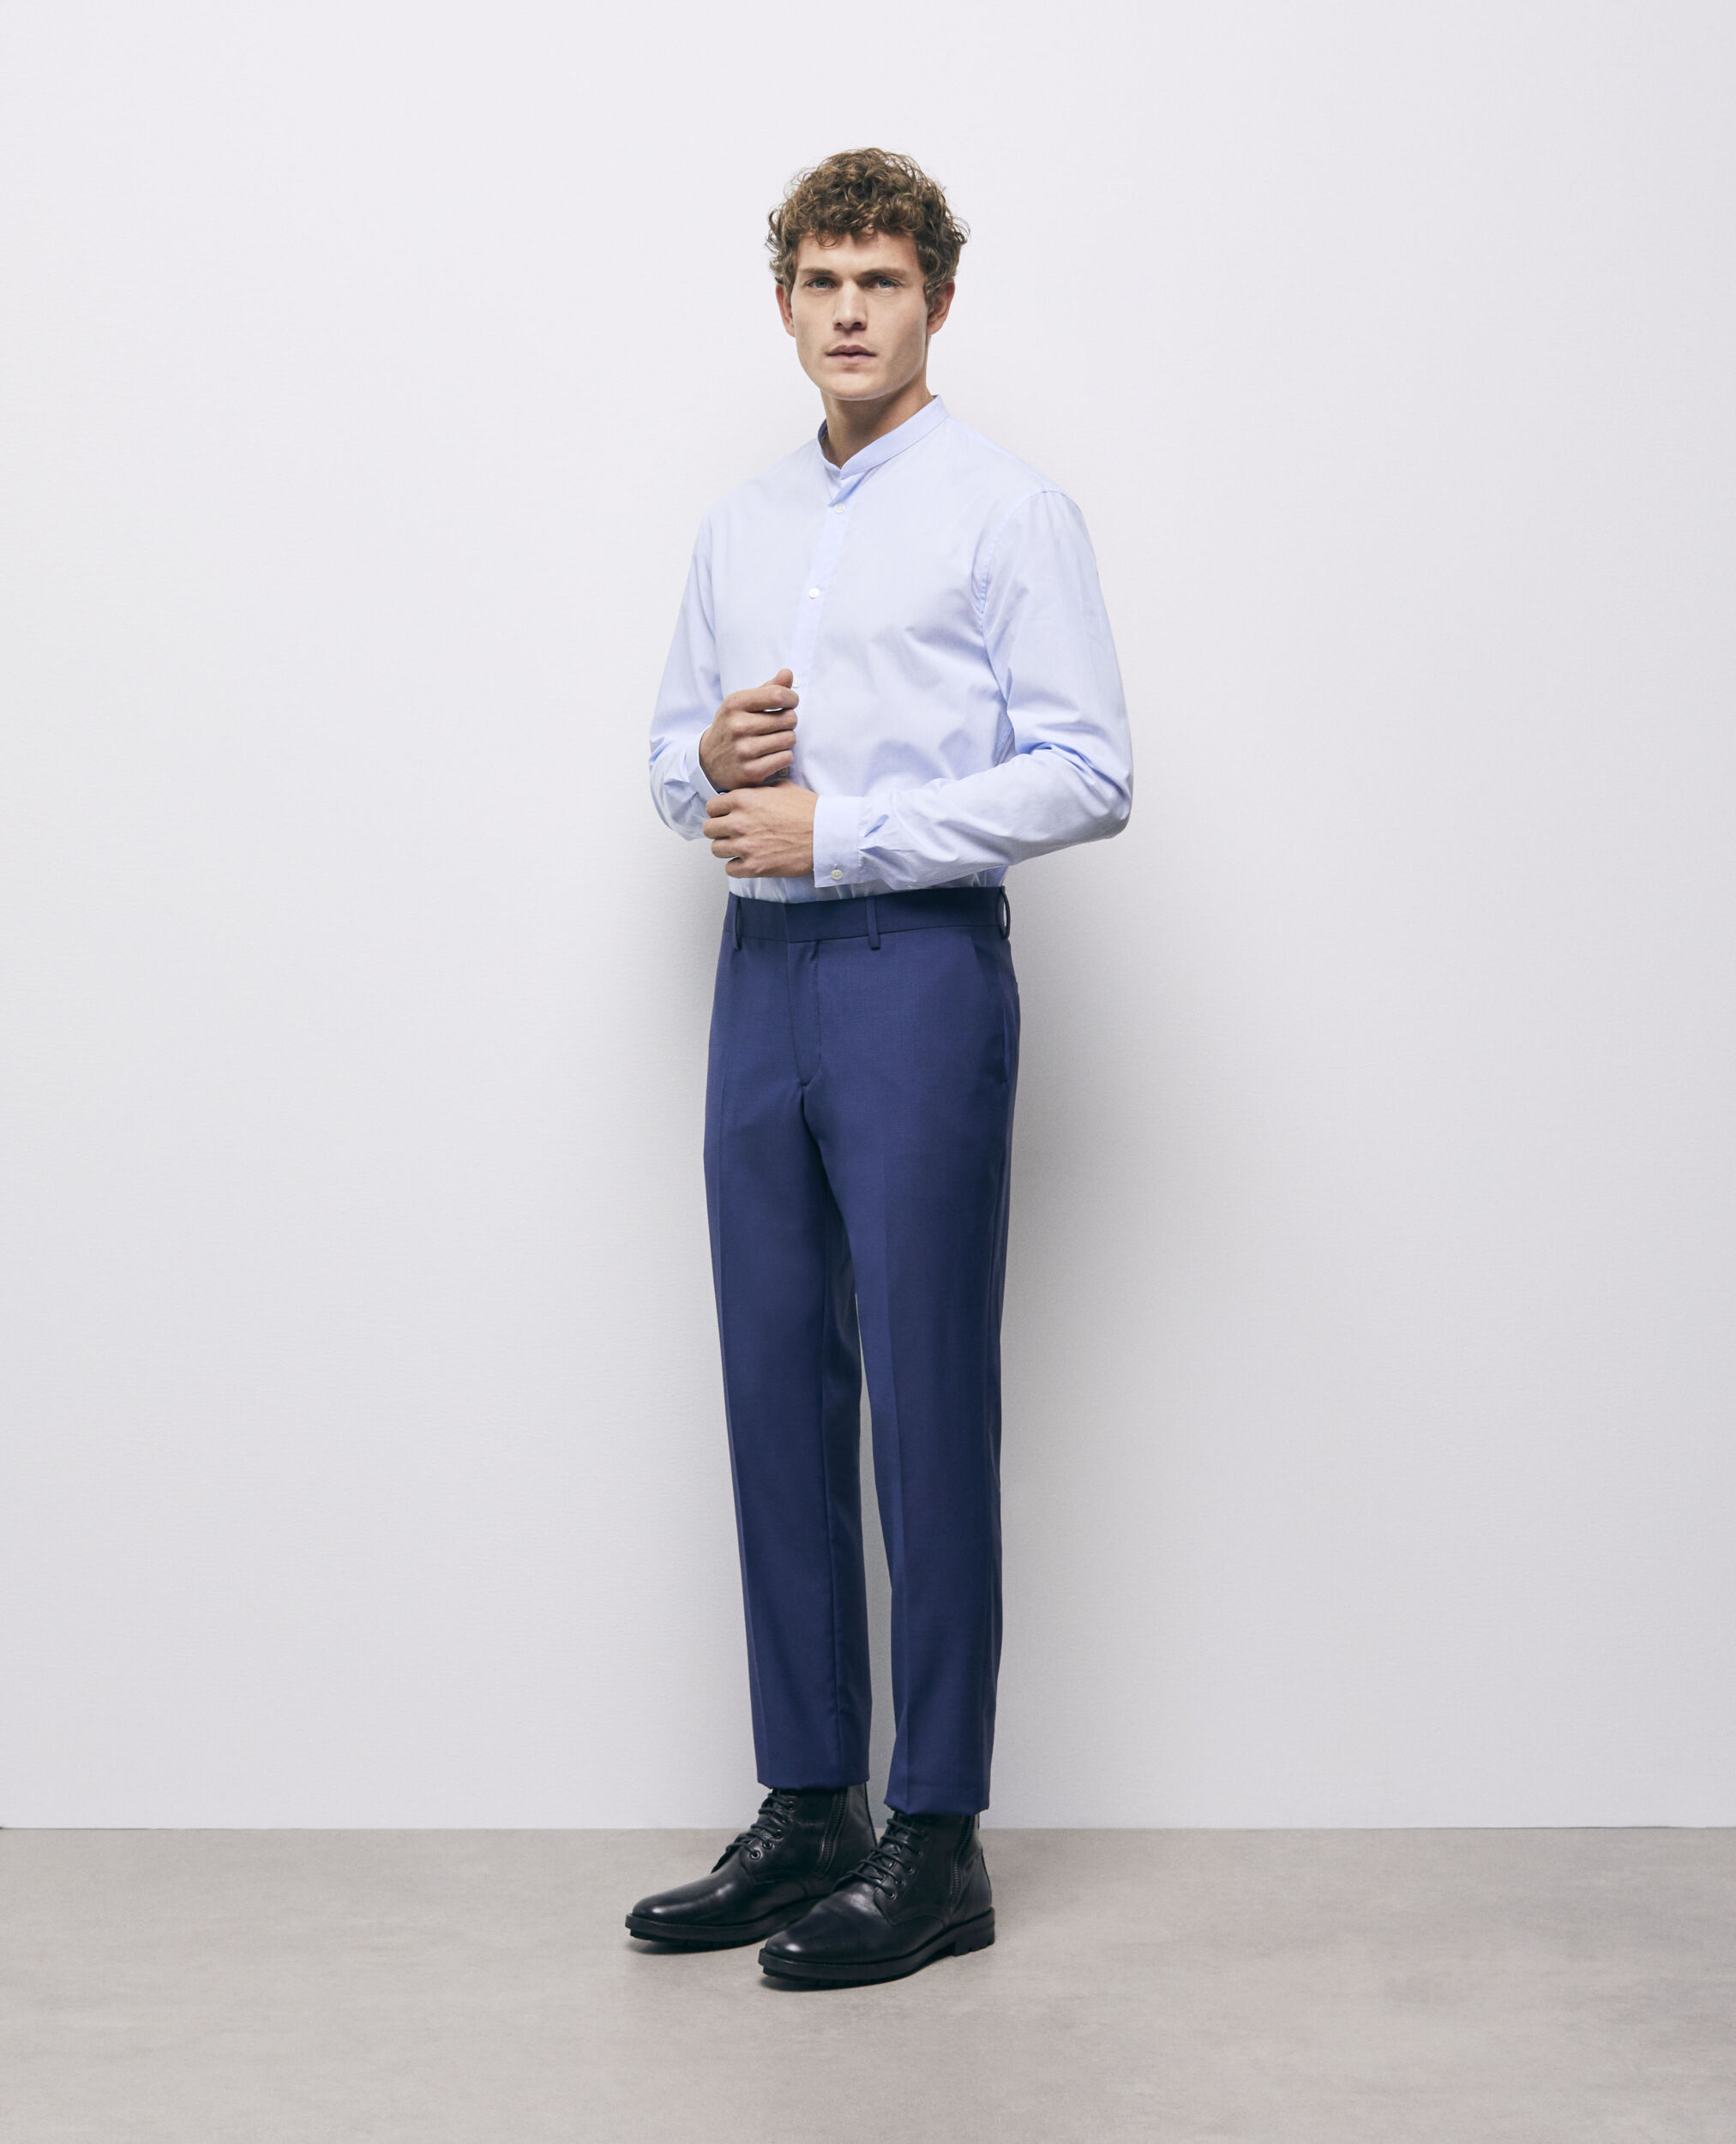 What colour shirt will go well with a blue pants? - Quora